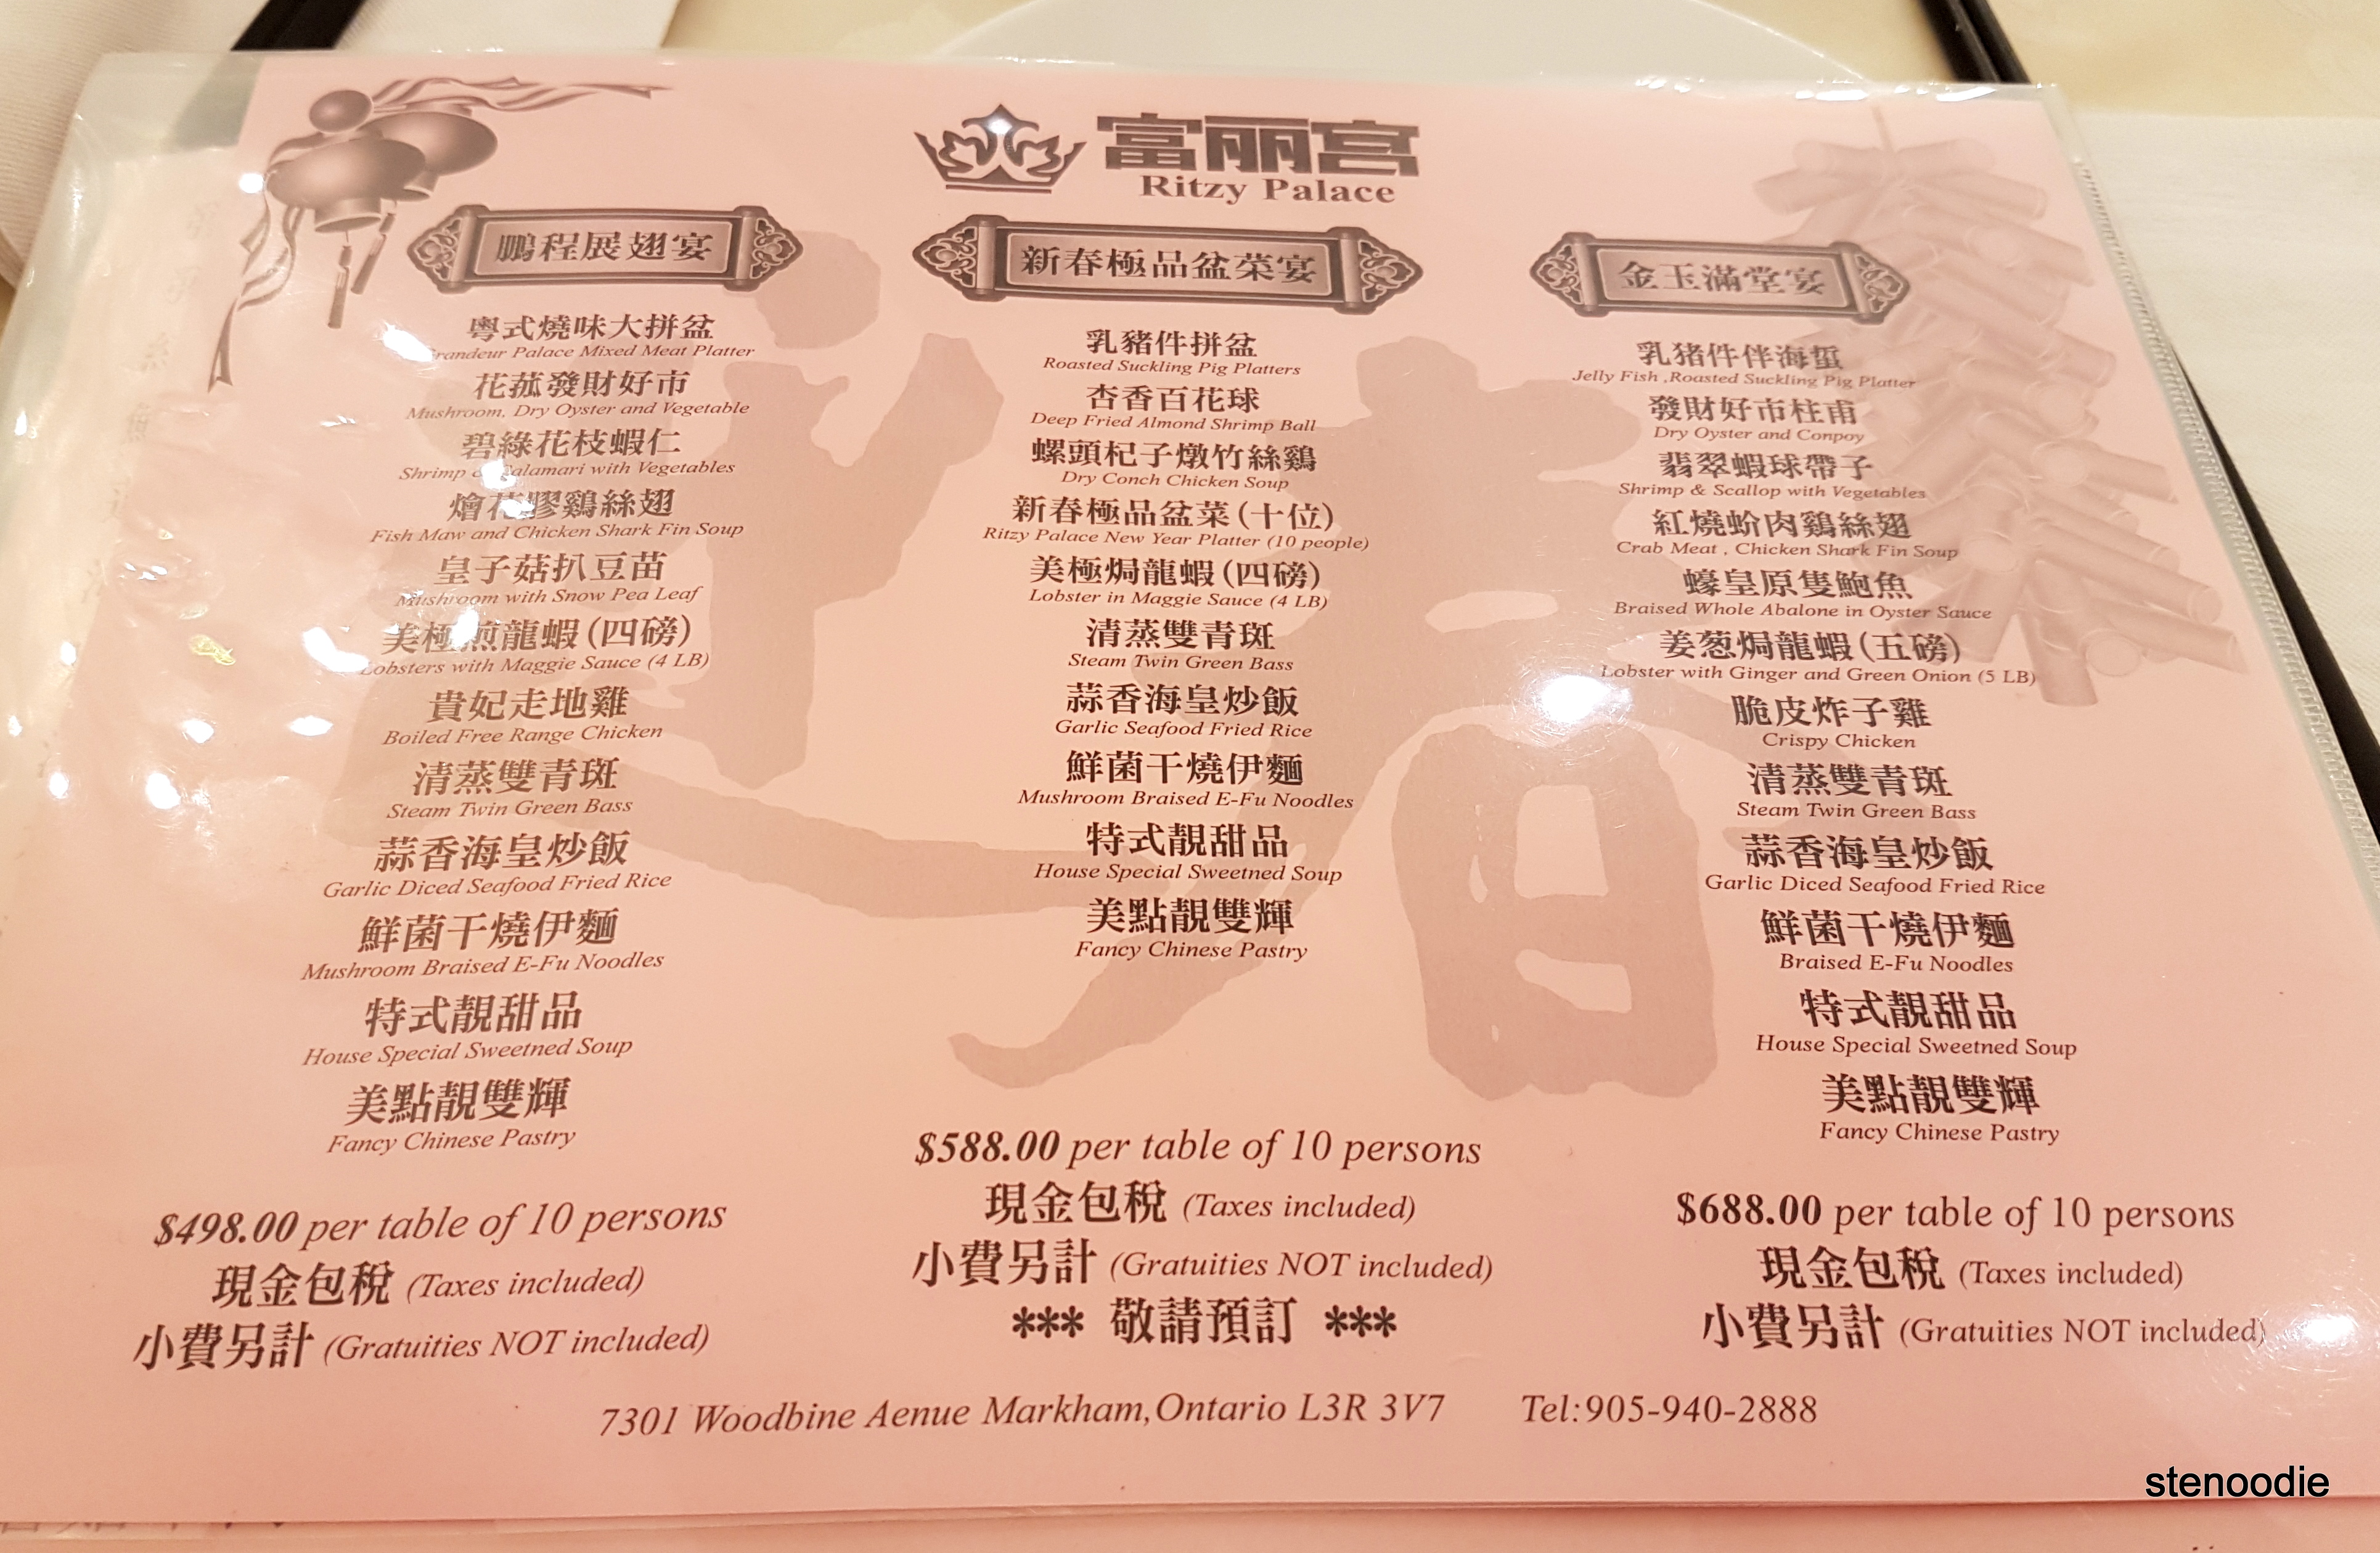 Ritzy Palace Chinese Cuisine set dinner menu and prices